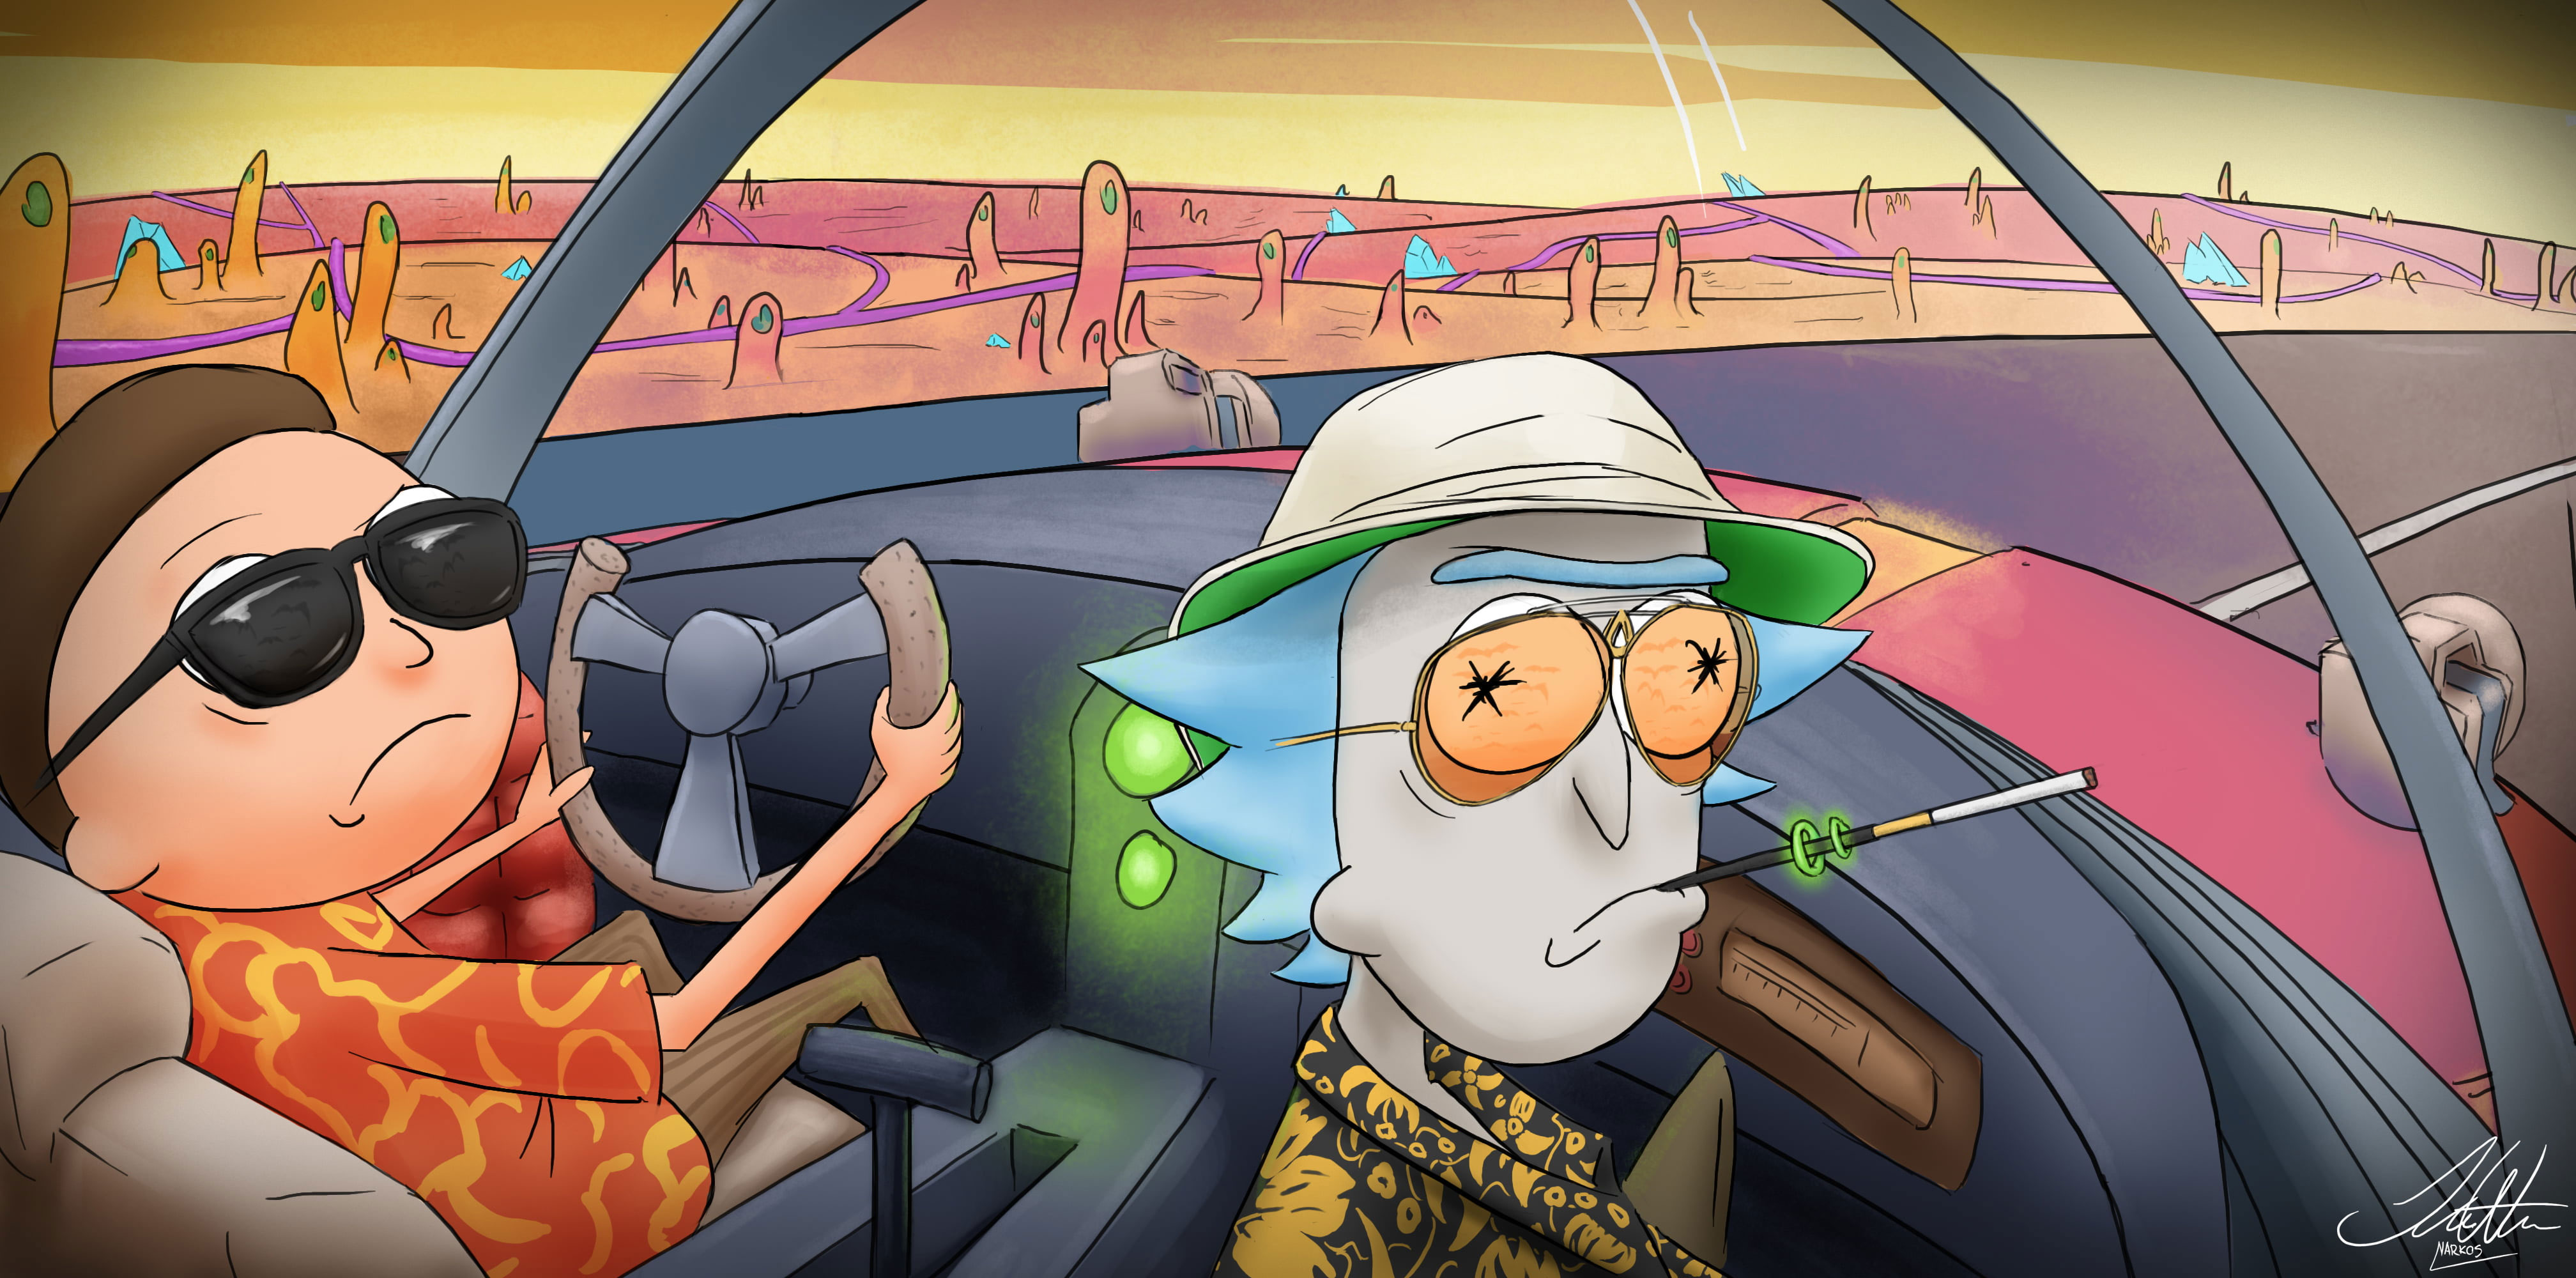 Wallpaper Rick And Morty, Fear And Loathing, Rick And Morty, Movies